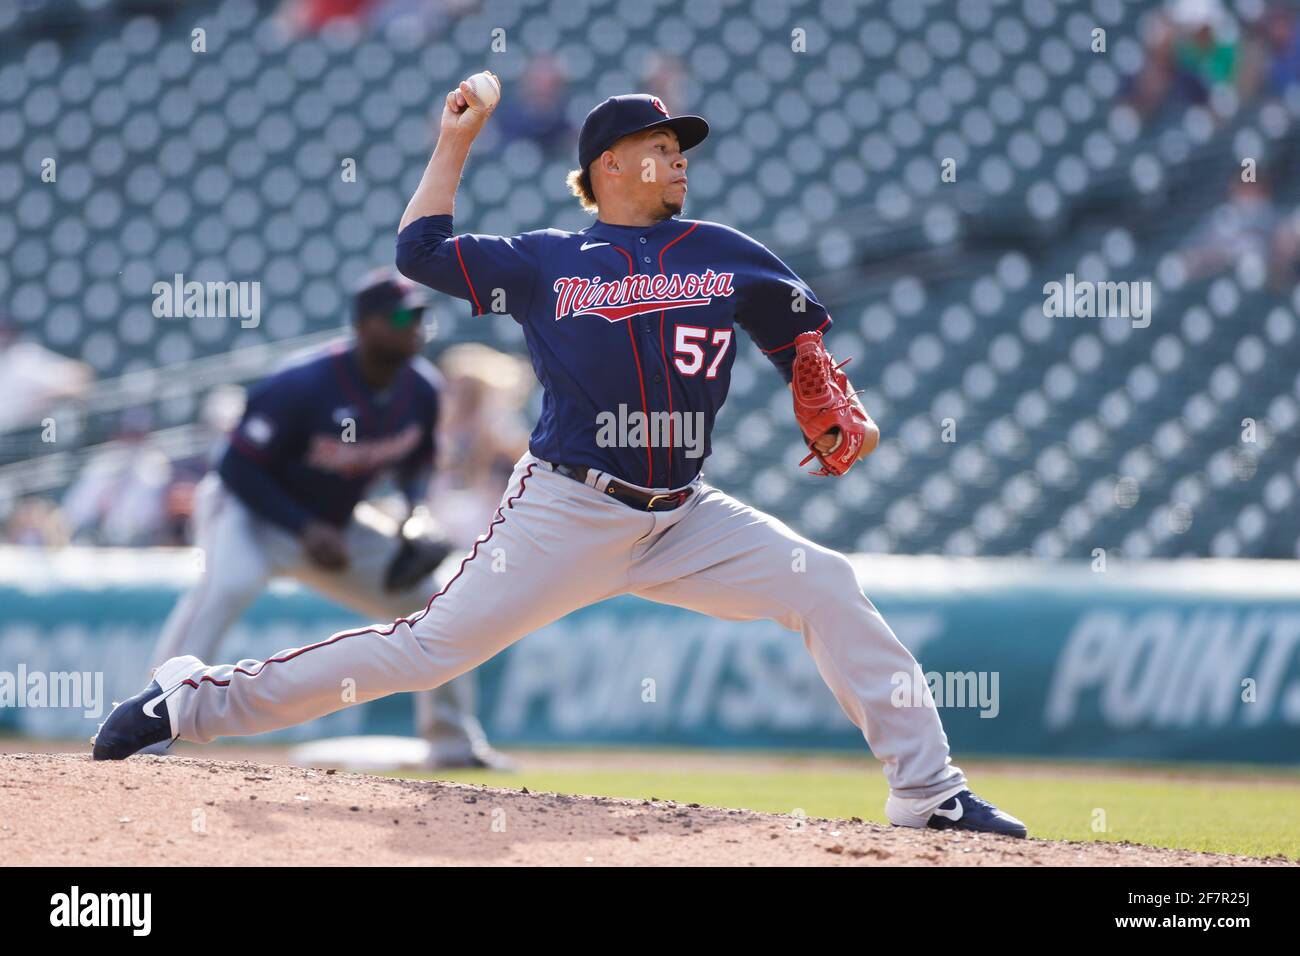 DETROIT, MI - APRIL 6: Hansel Robles (57) of the Minnesota Twins pitches against the Detroit Tigers at Comerica Park on April 6, 2021 in Detroit, Mich Stock Photo